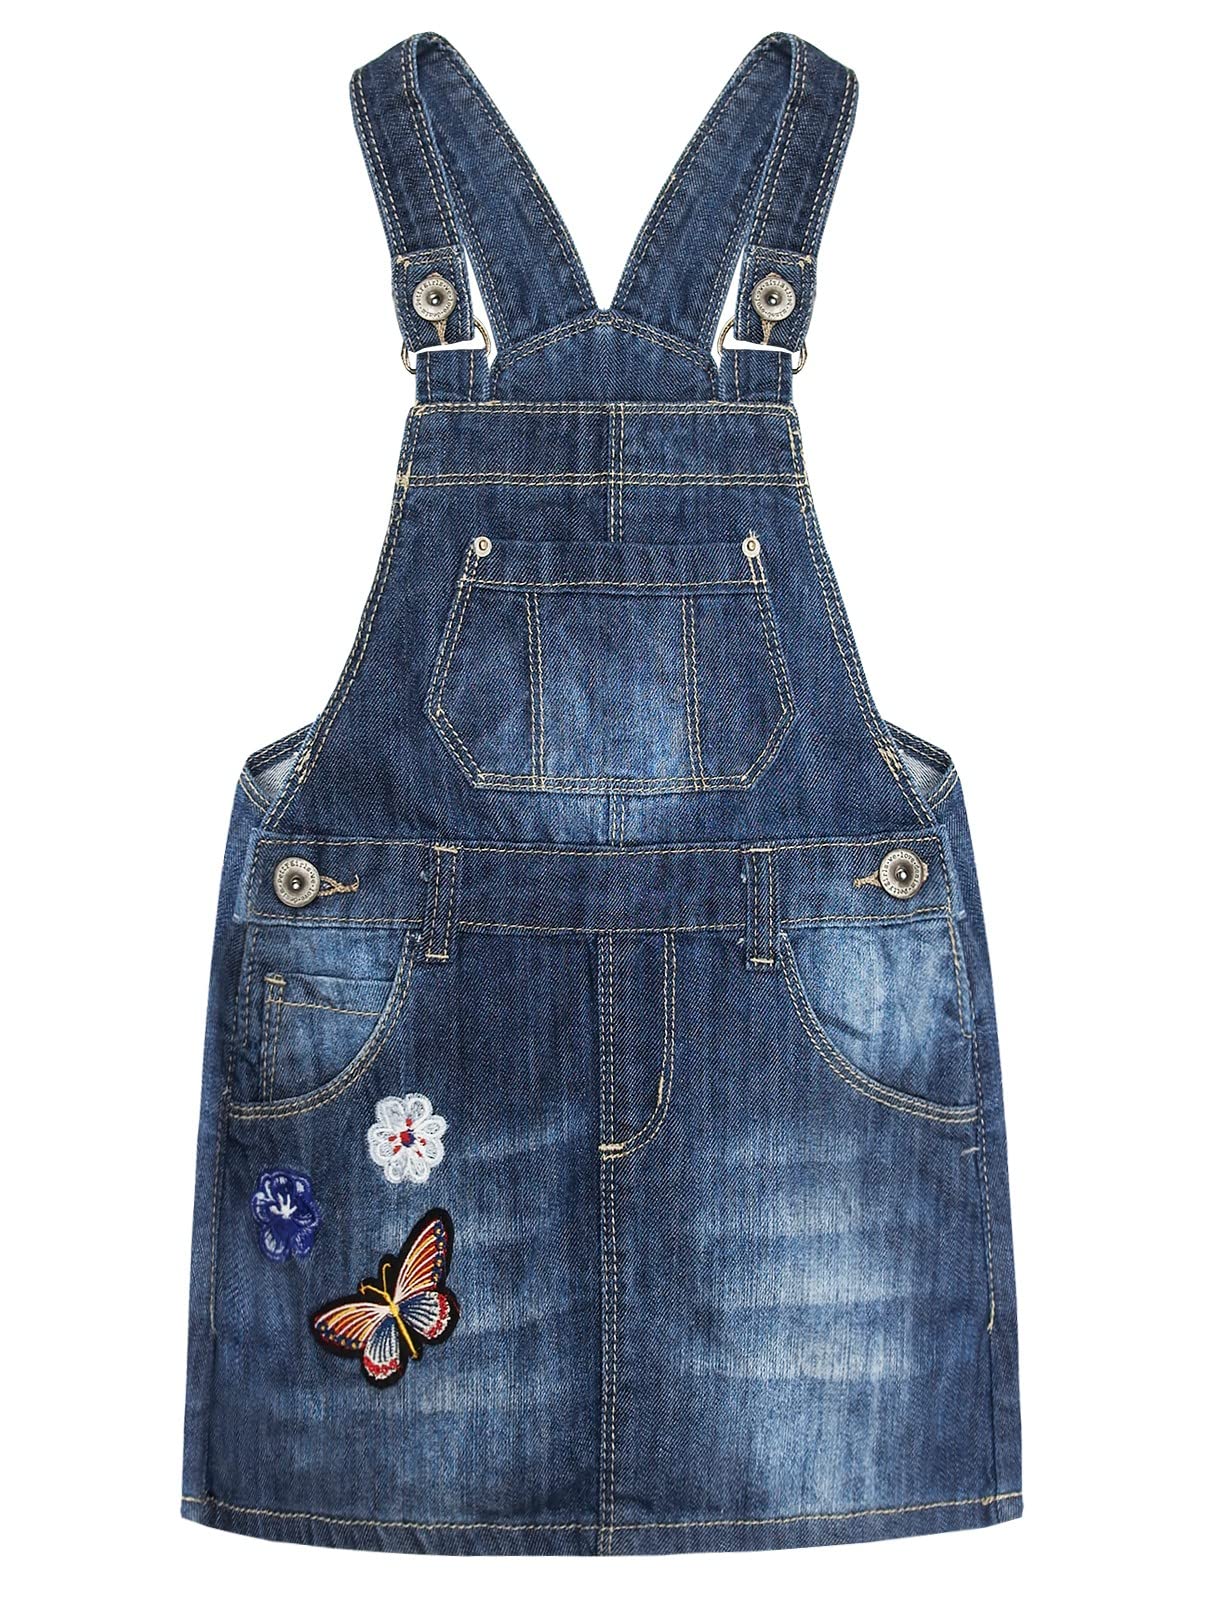 KIDSCOOL SPACE Baby Little Girls Fox Flowers Embroidered Lace Denim Overall Dress